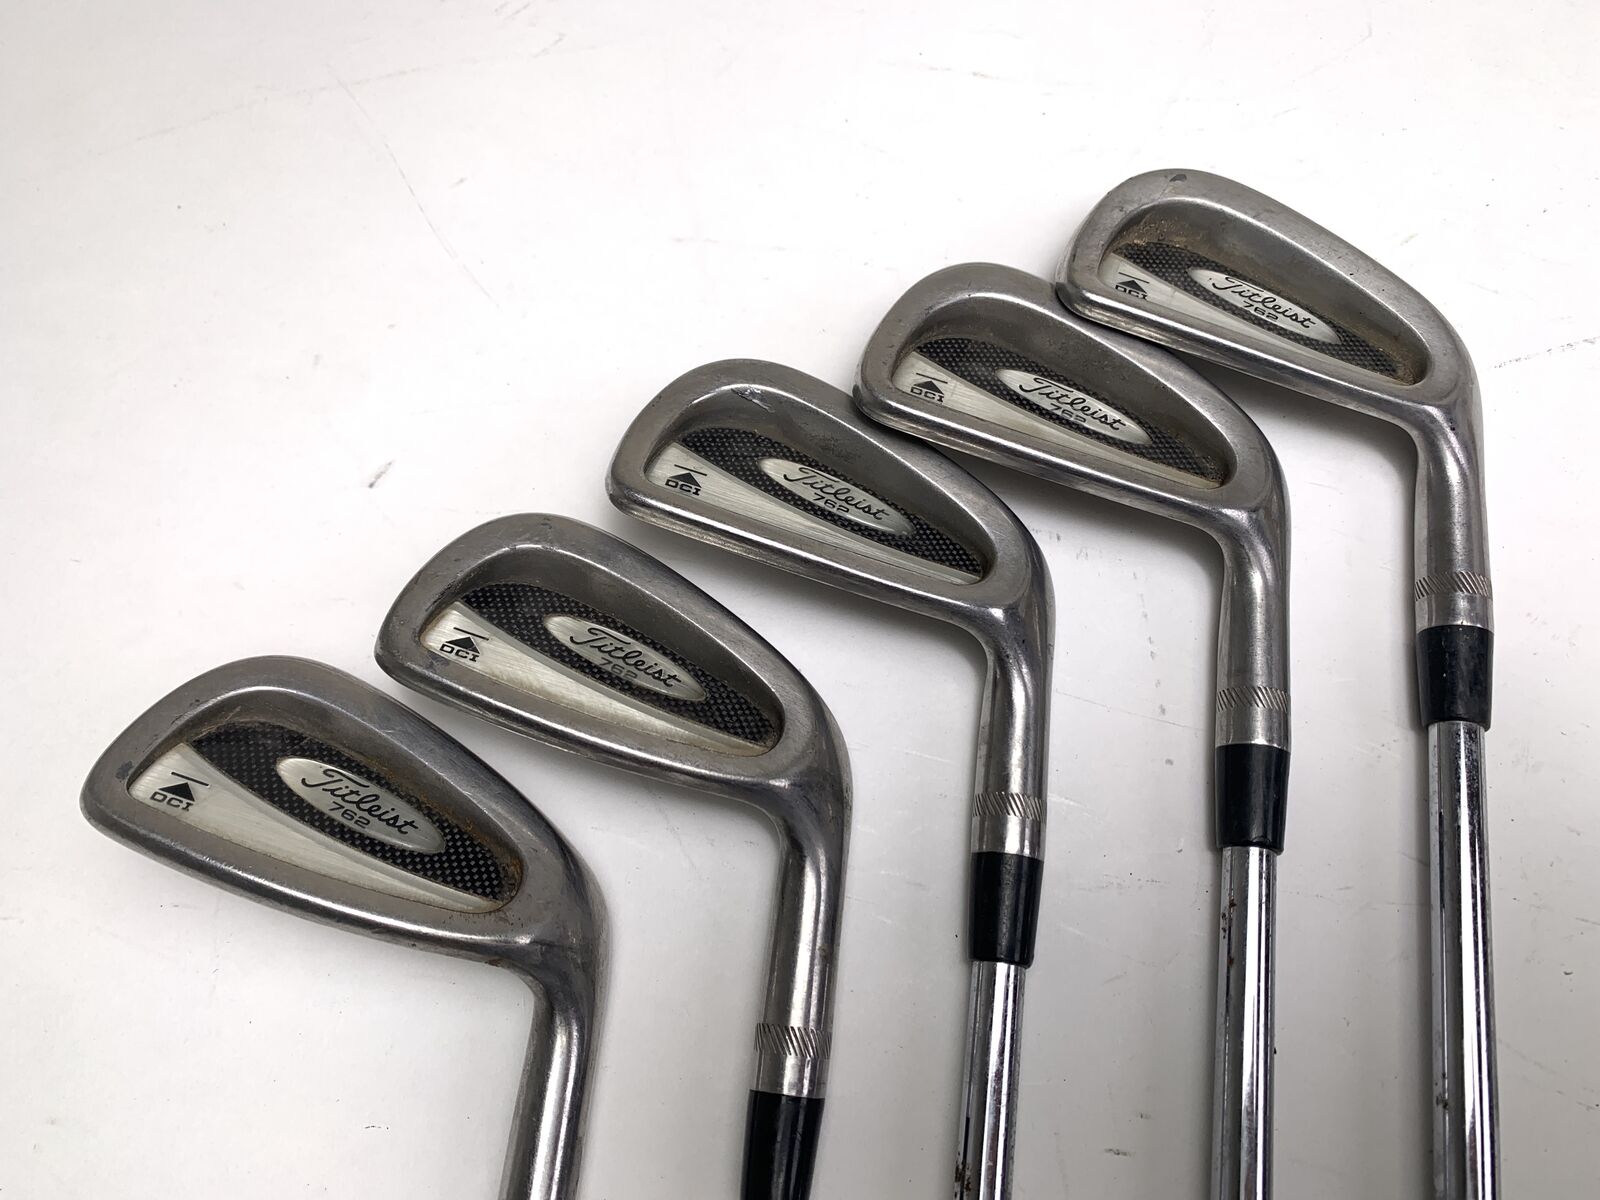 Titleist DCI 762 Irons Review - Are They Forgiving & Good for High ...